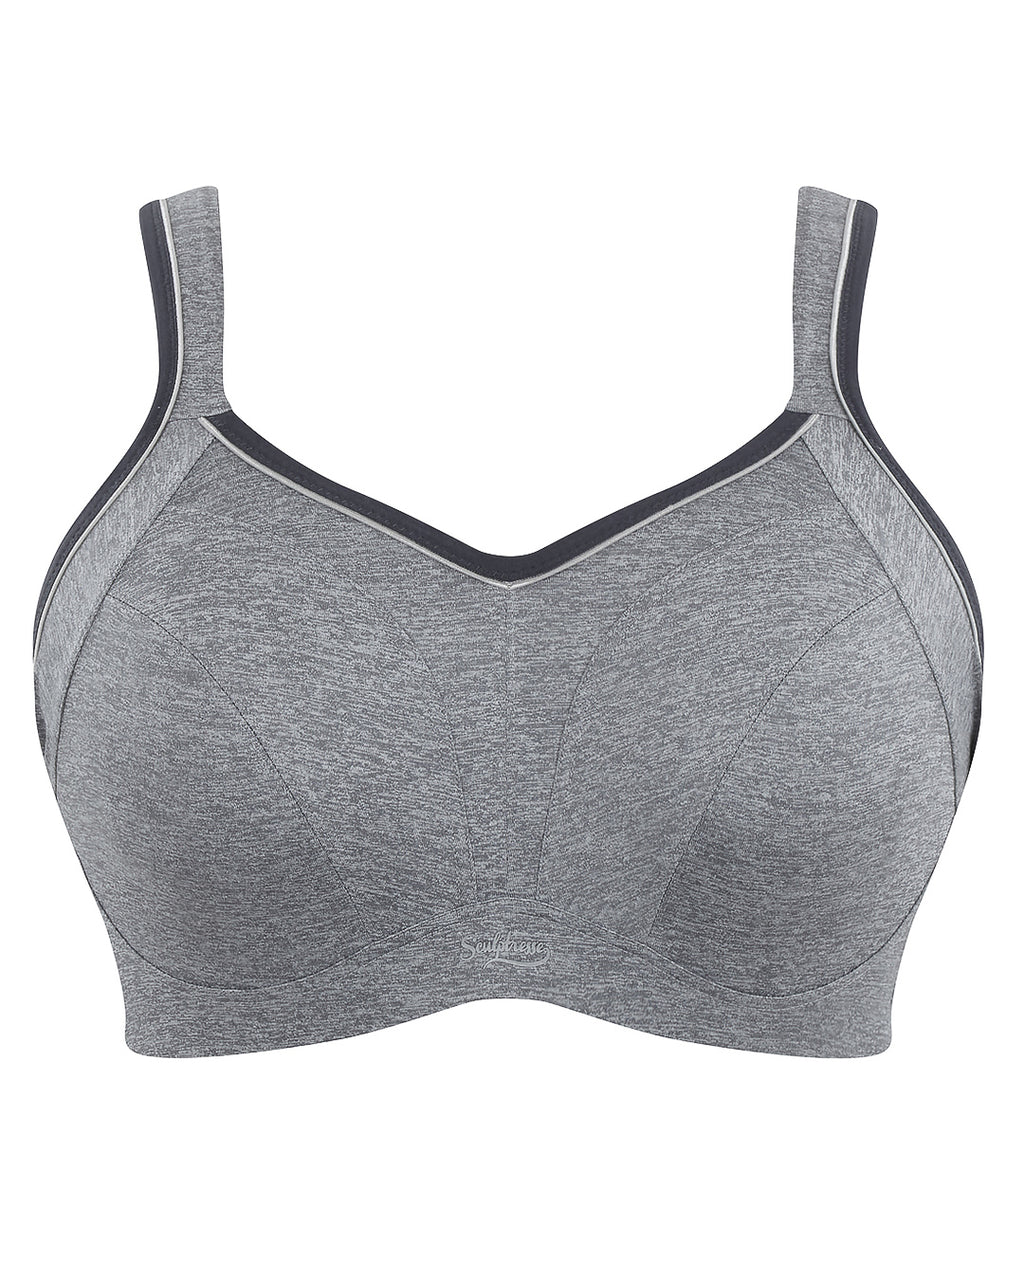 Panache Lingerie - Our non wired sports bras offer amazing support 🏆 With  a racer back feature, seamless inner cups & an encapsulated fit ✓    #PanacheSport #Fitness